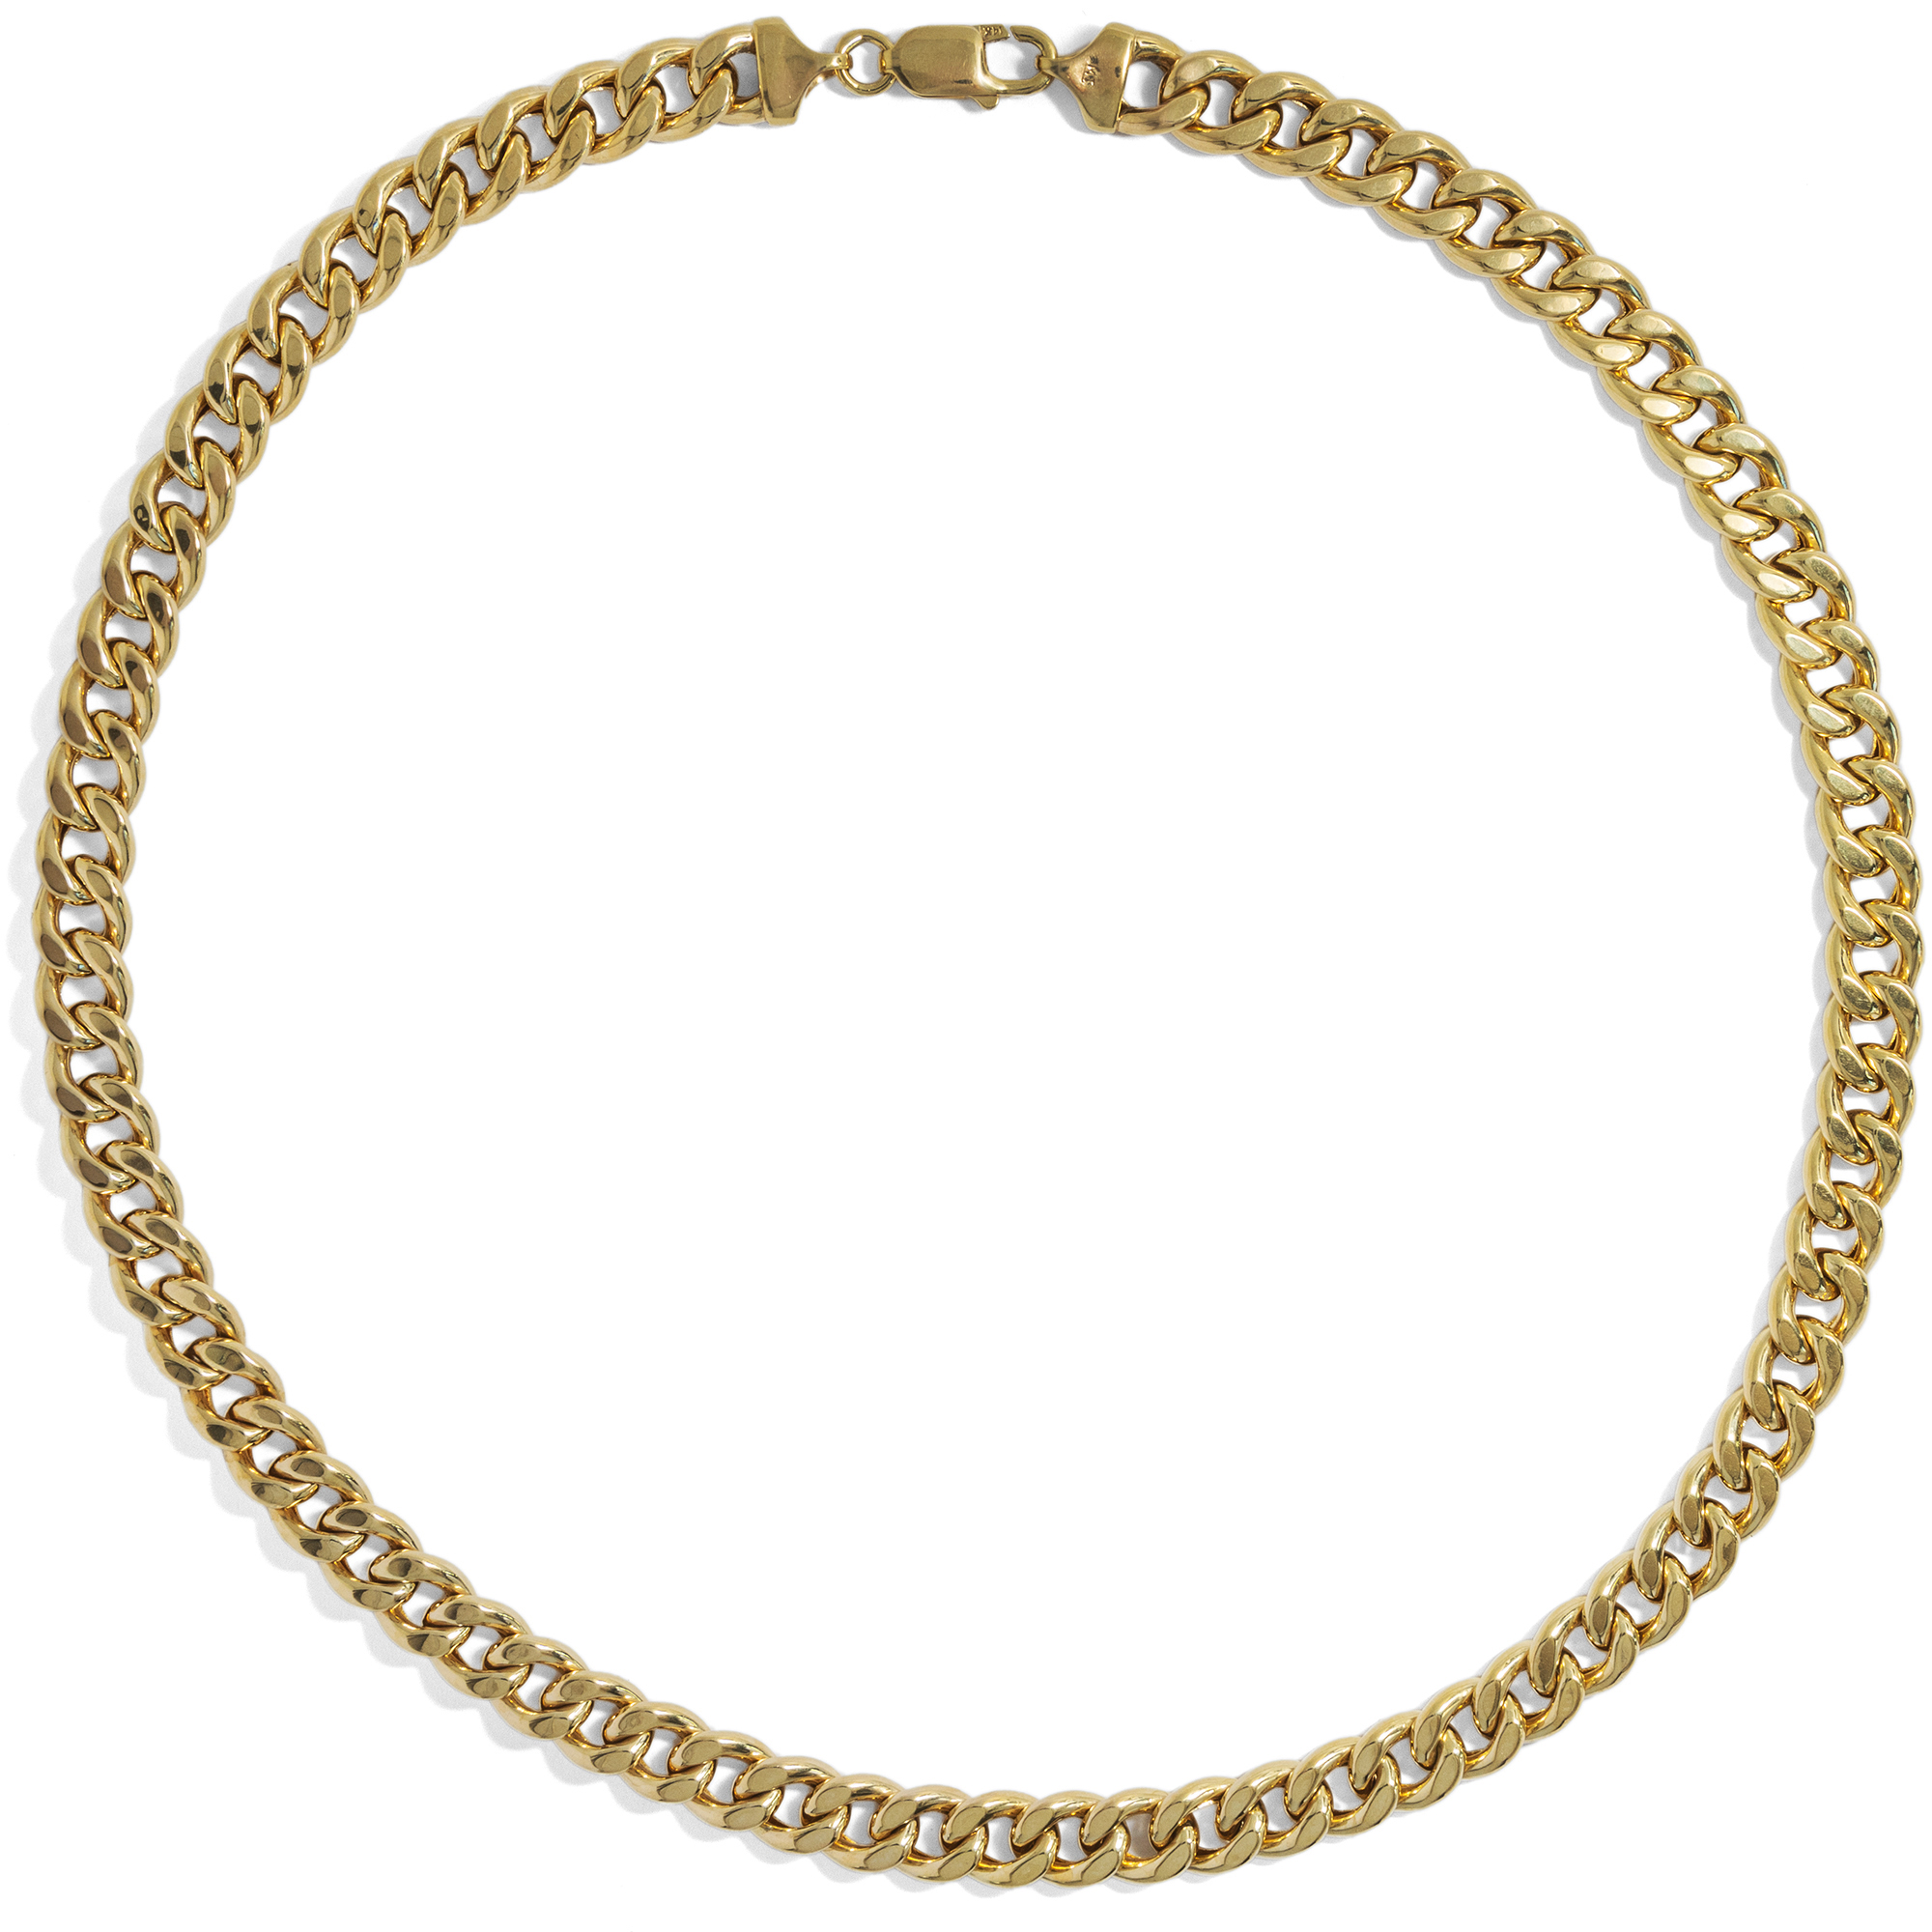 Wide Gold Curb Chain, Probably From the US, c. 1985